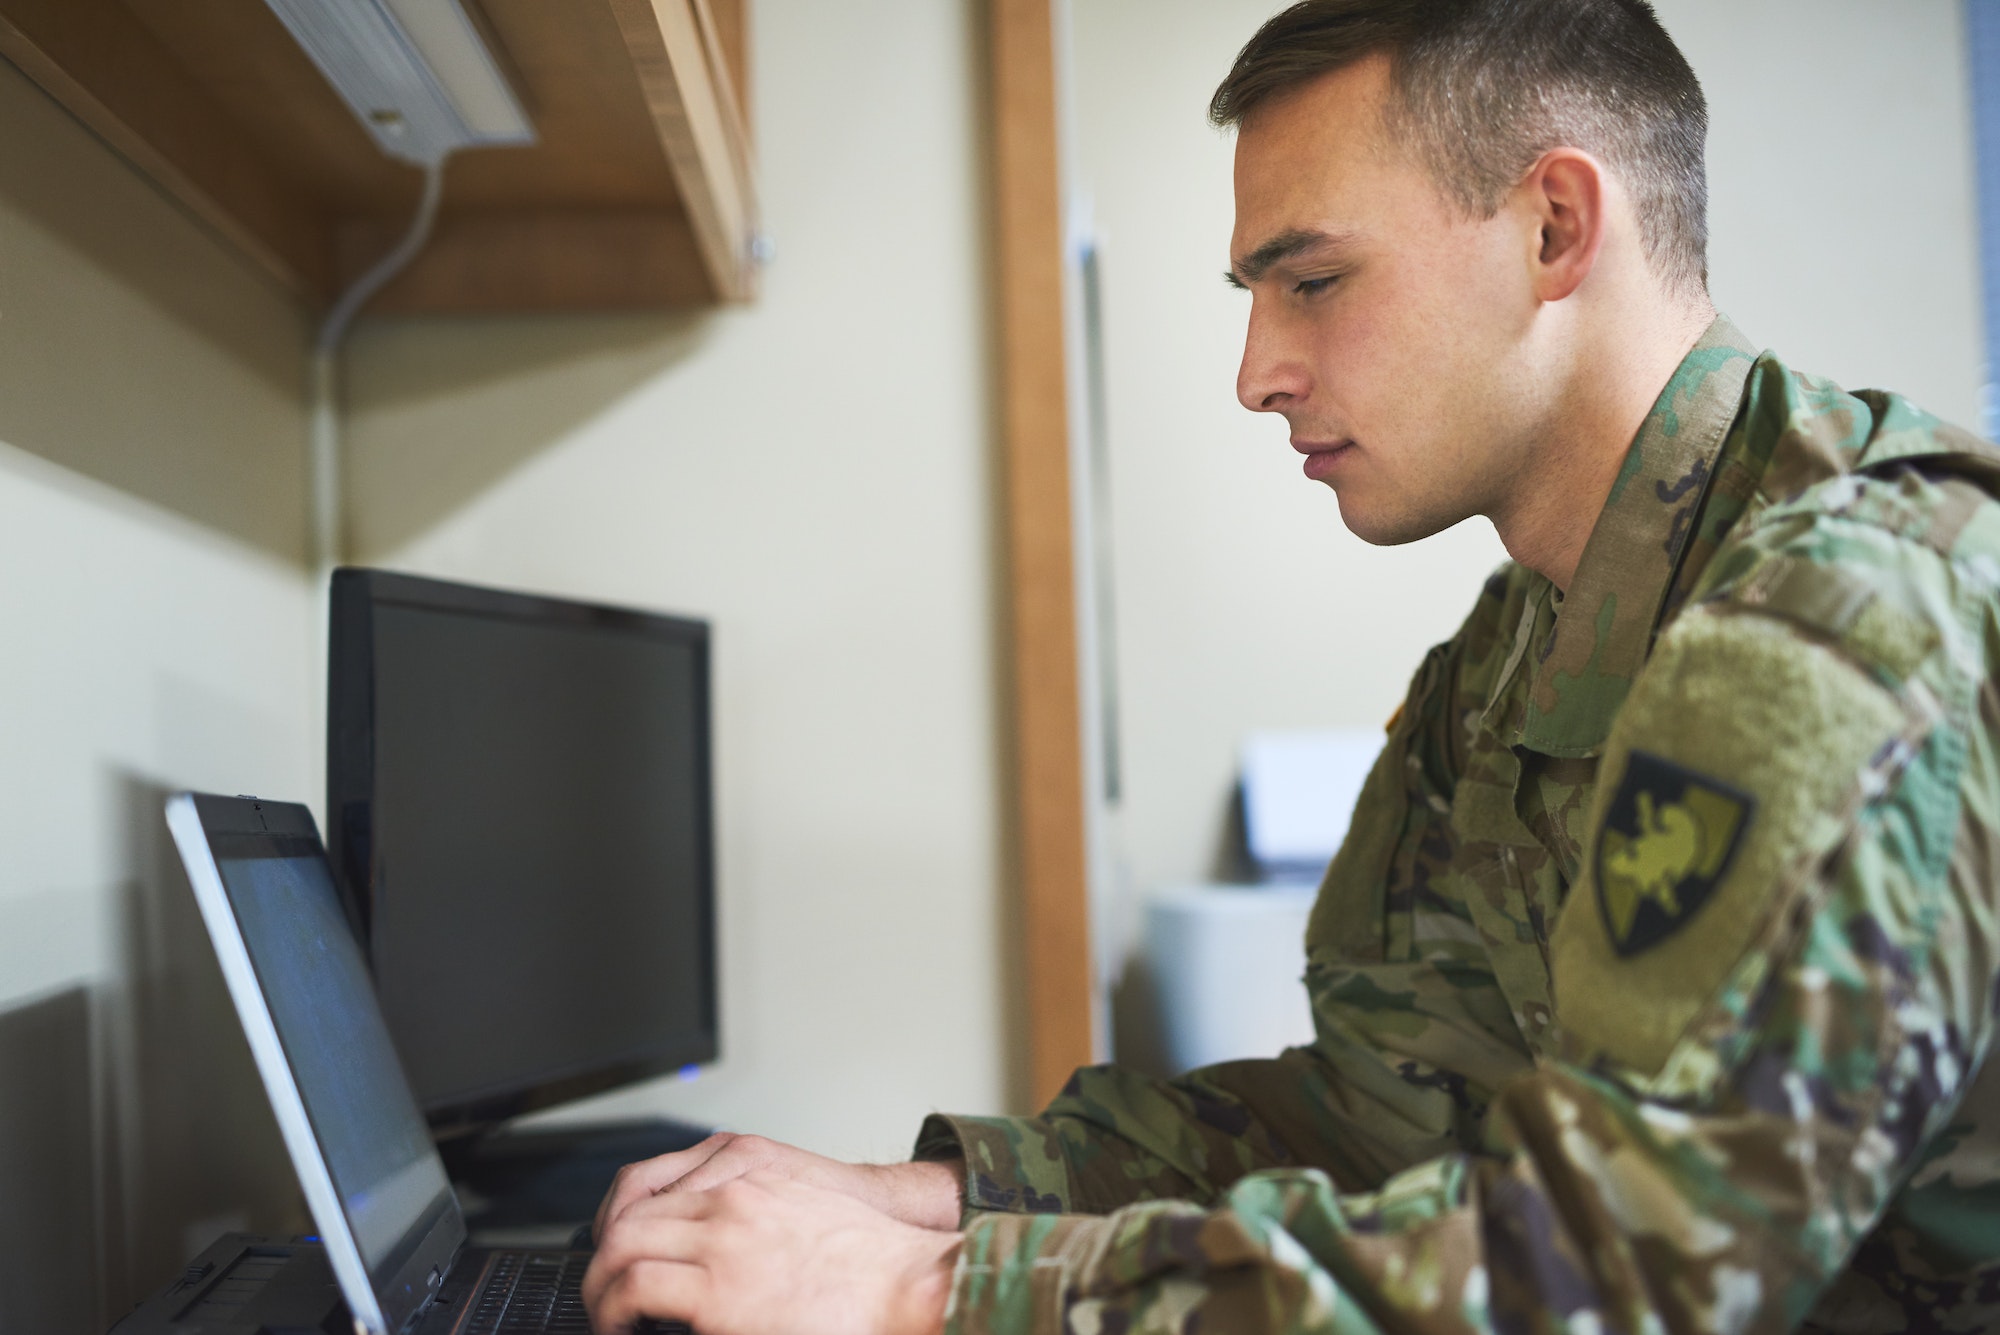 Shot of a young soldier using a laptop in the dorms of a military academy